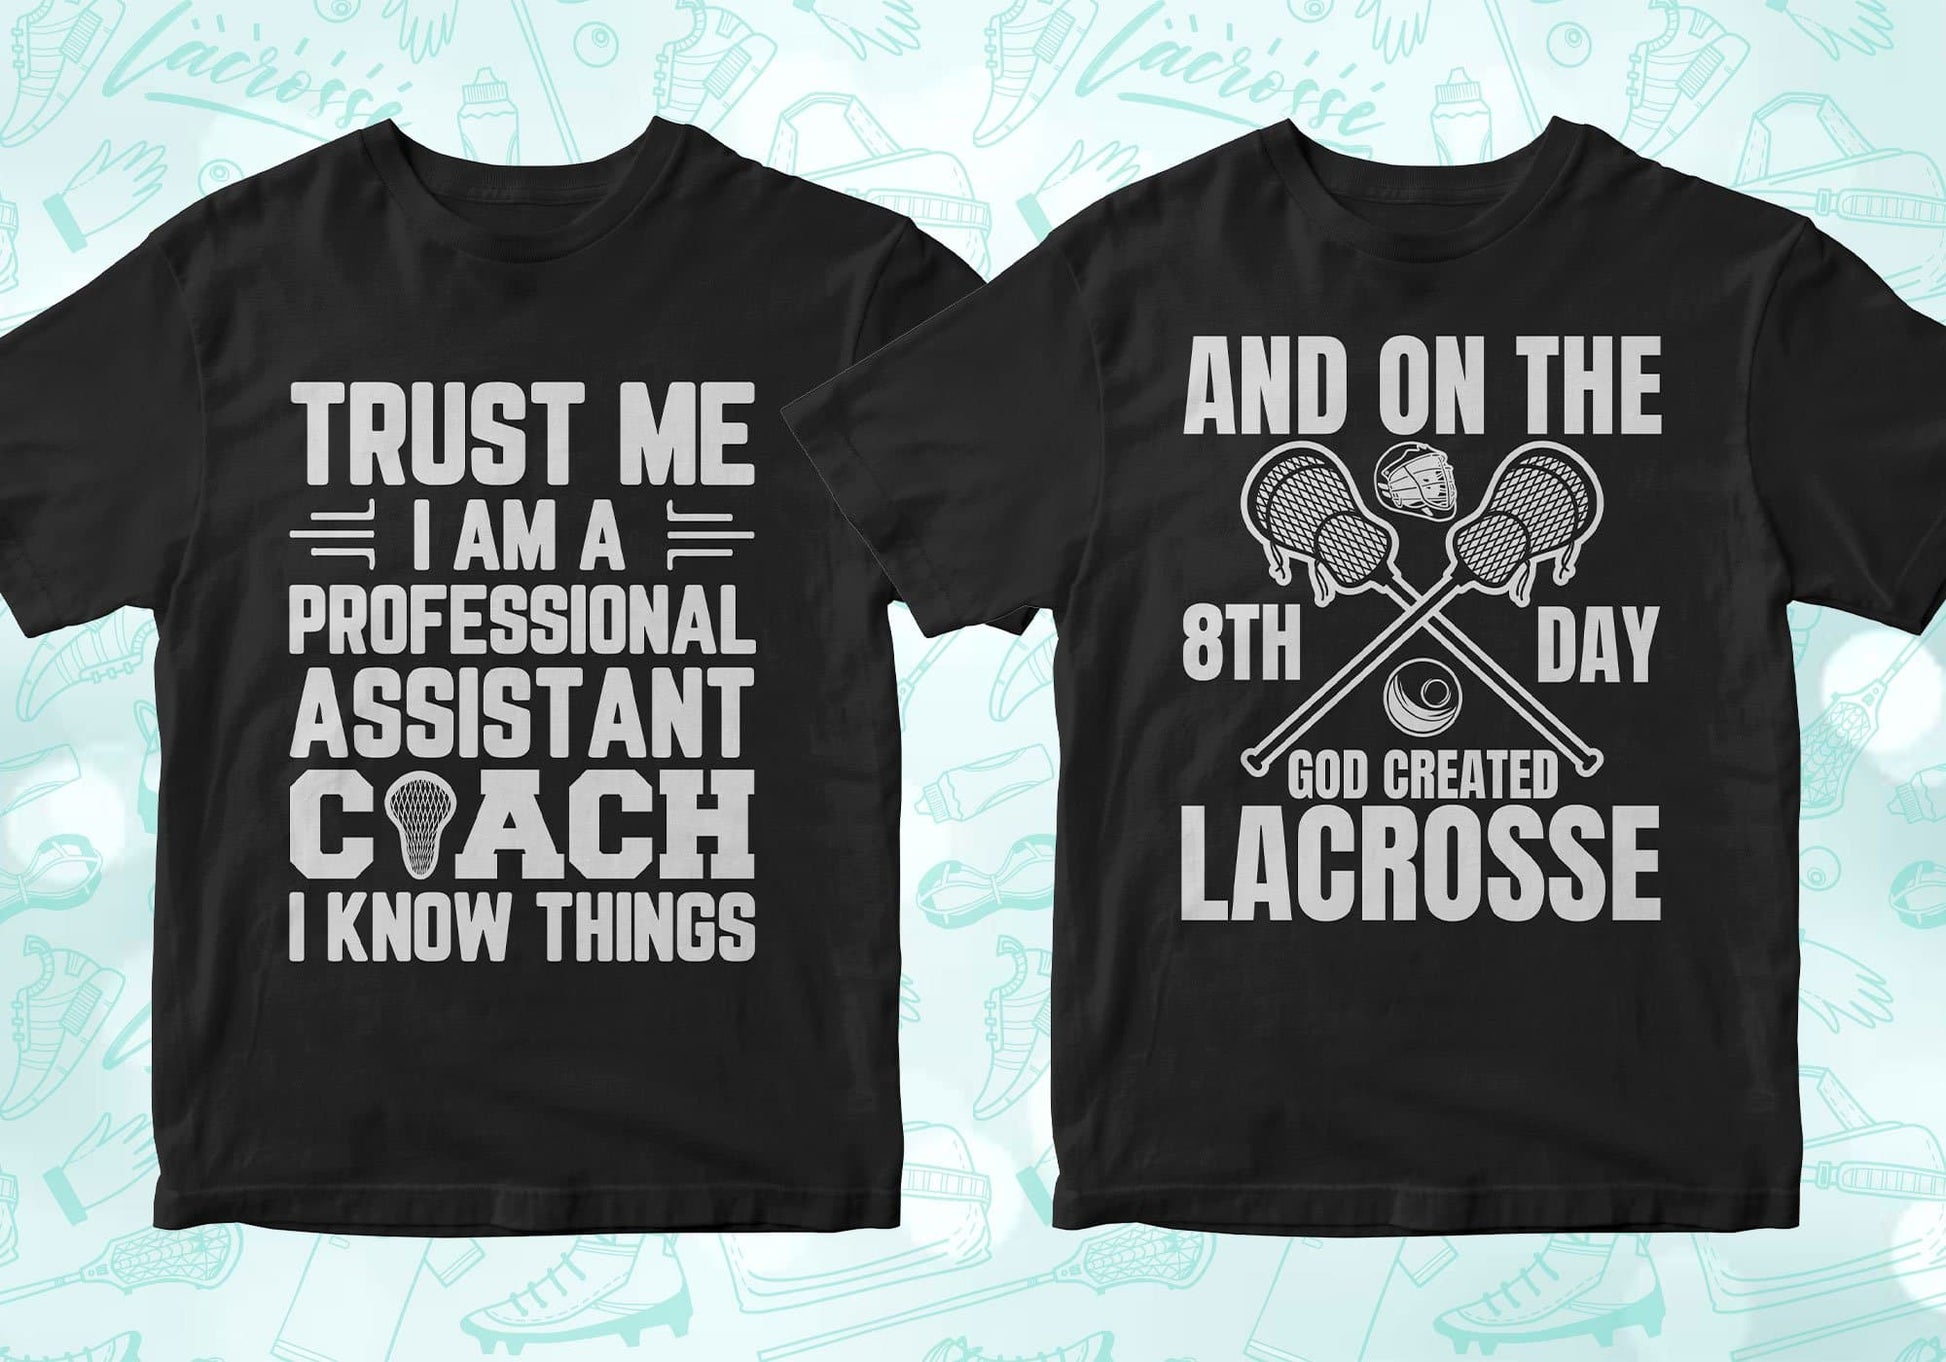 trust me i am a professional assistant coach i know things, and on the 8th day god created lacrosse, lacrosse shirts lacrosse tshirt lacrosse t shirts lacrosse shirt designs lacrosse graphic